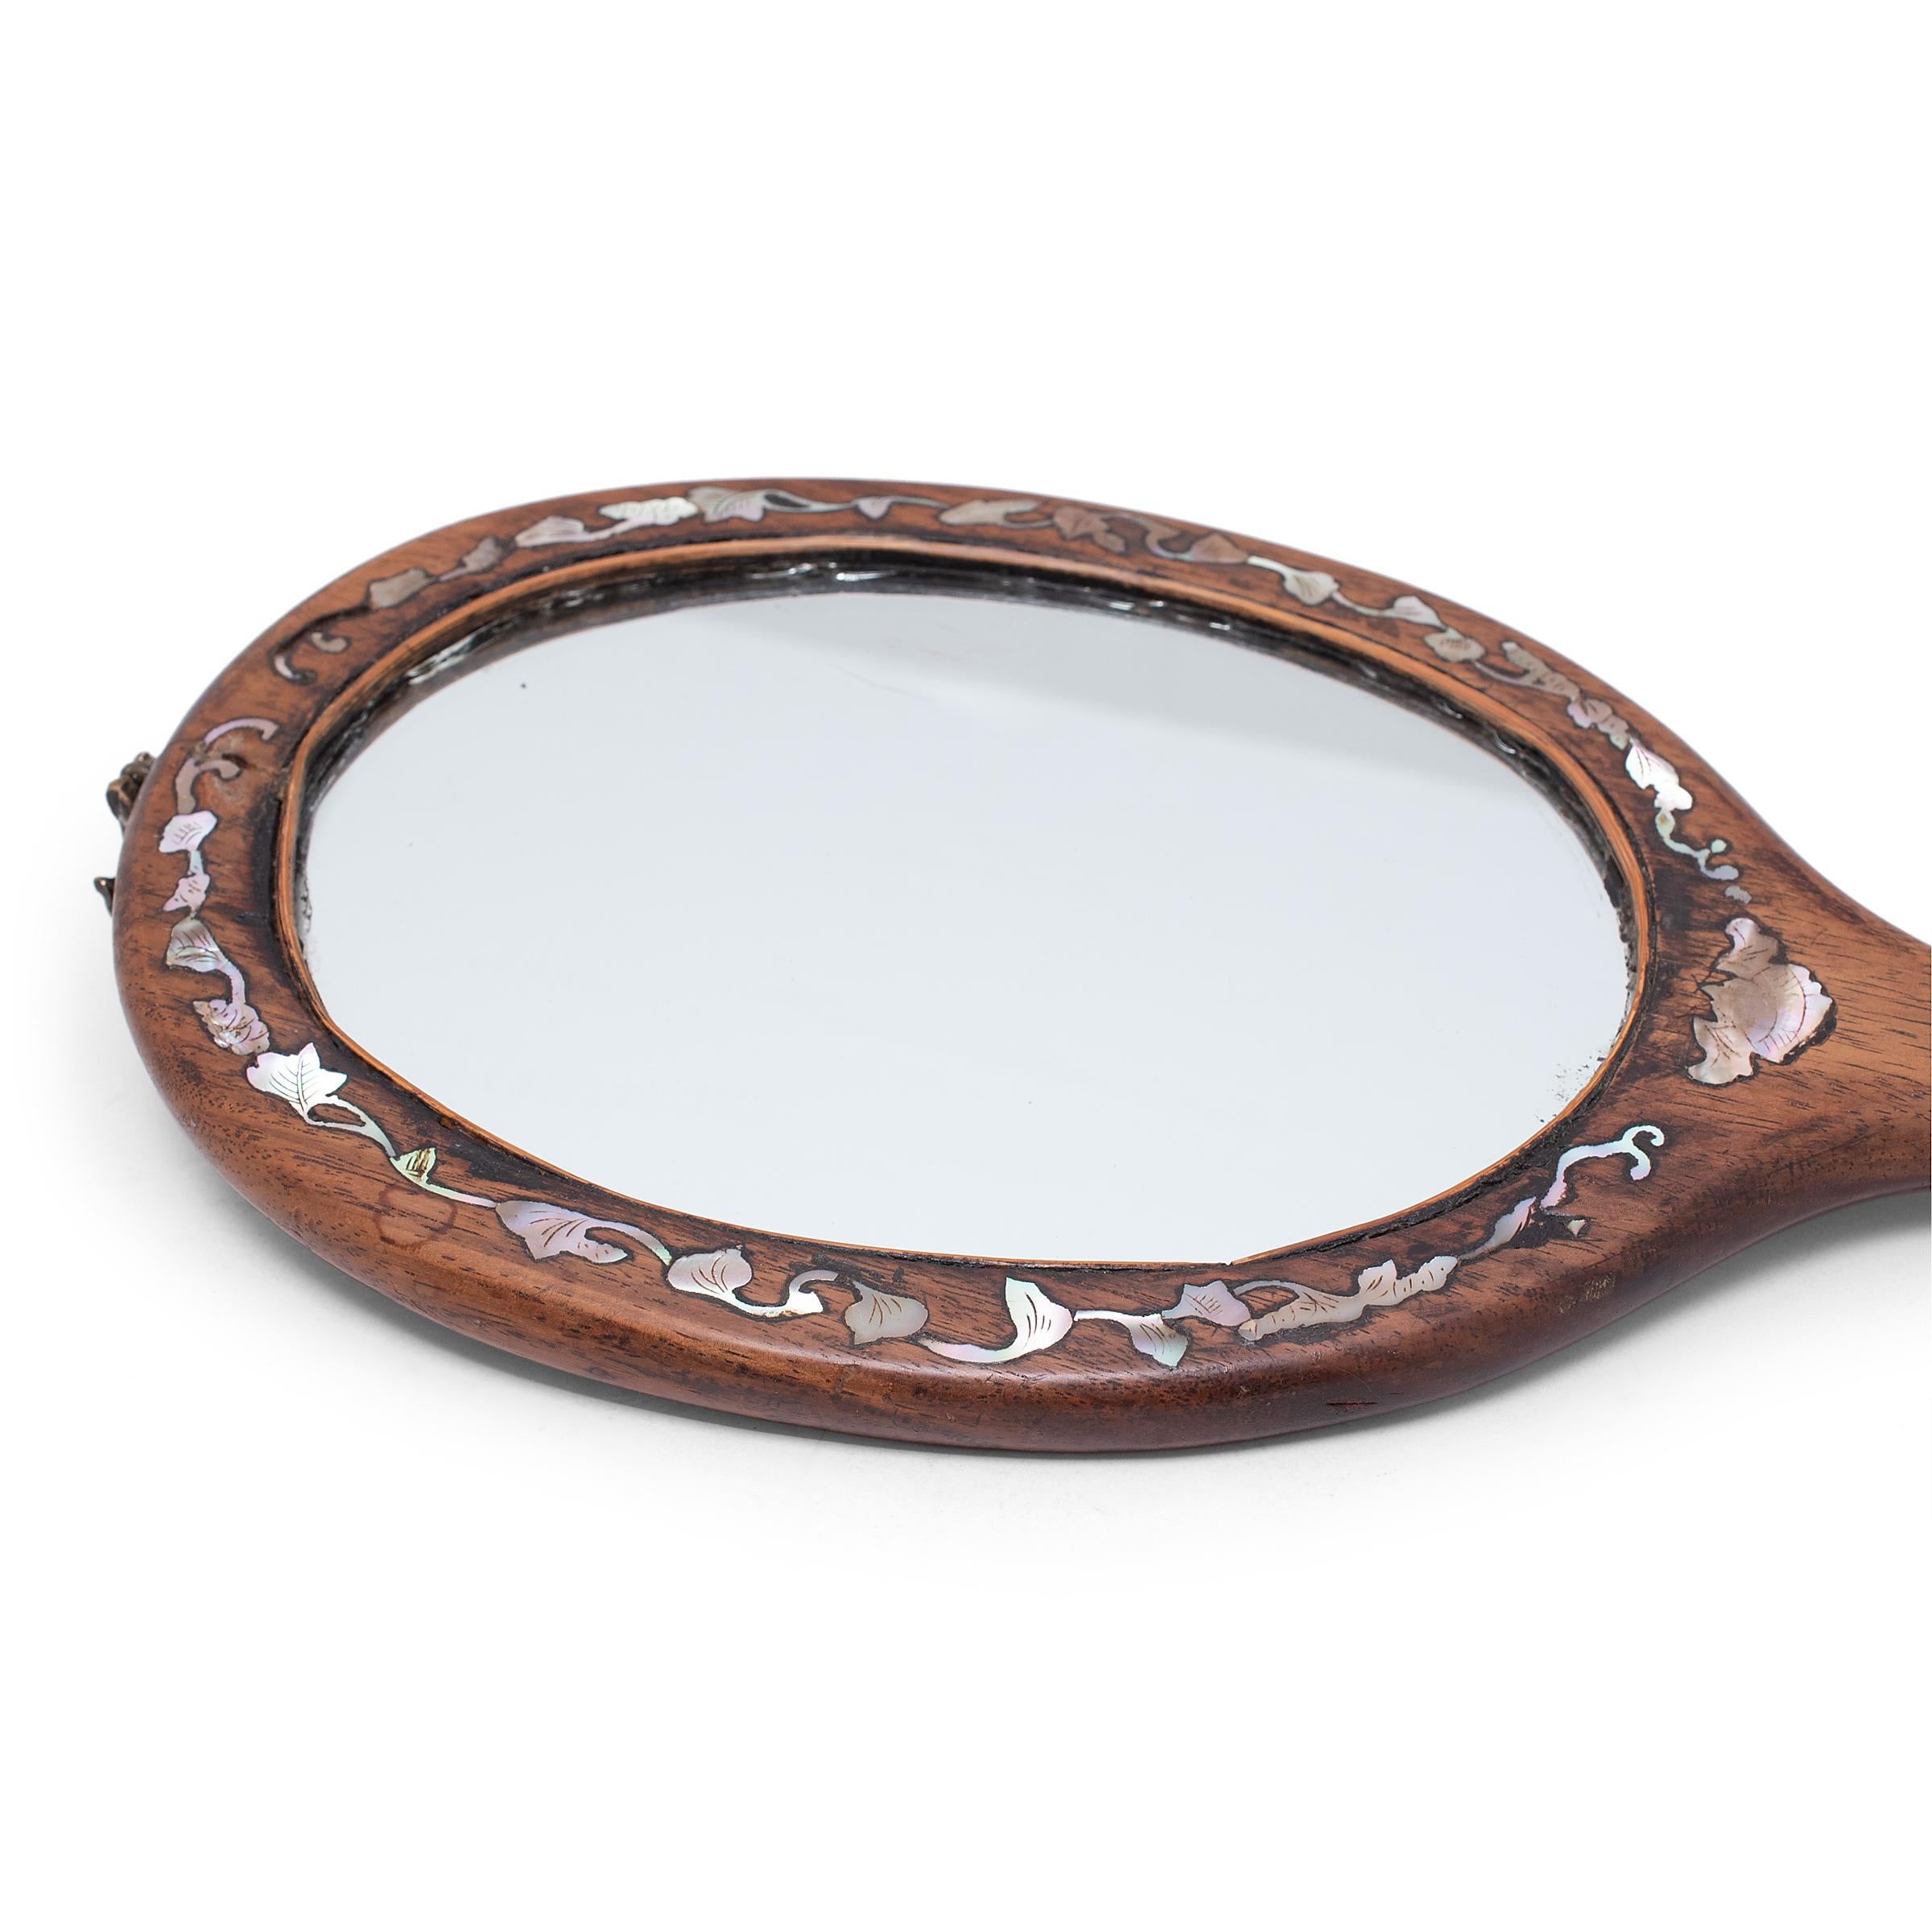 This large, early 20th-century hand mirror is set in a fine hardwood frame decorated with mother-of-pearl inlay of flowering vines. The handle is decorated with plum blossoms and a bat with outstretched wings, a symbol of joy and happiness. Each